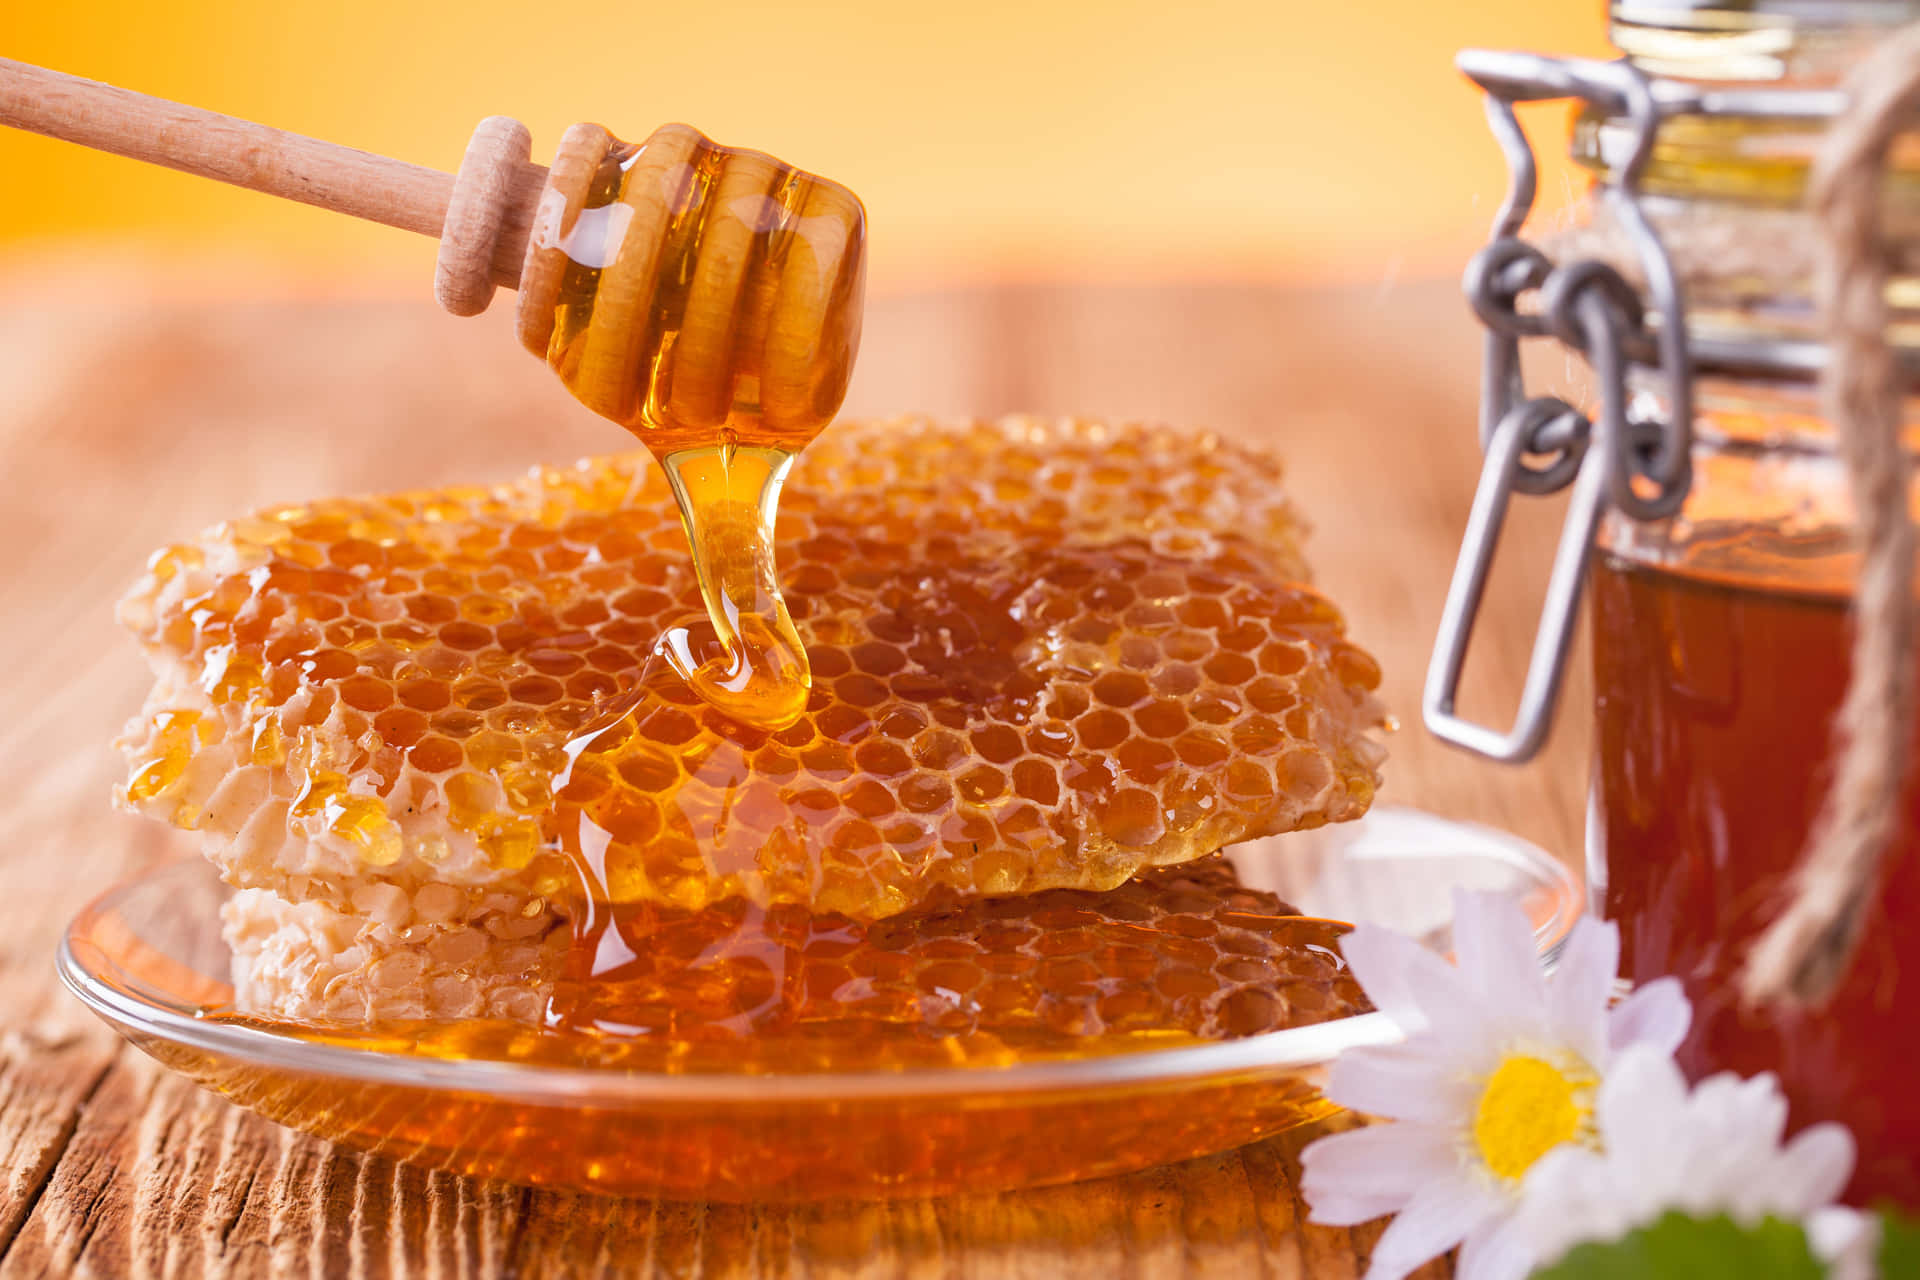 Honey Is Dripping From A Jar On A Plate